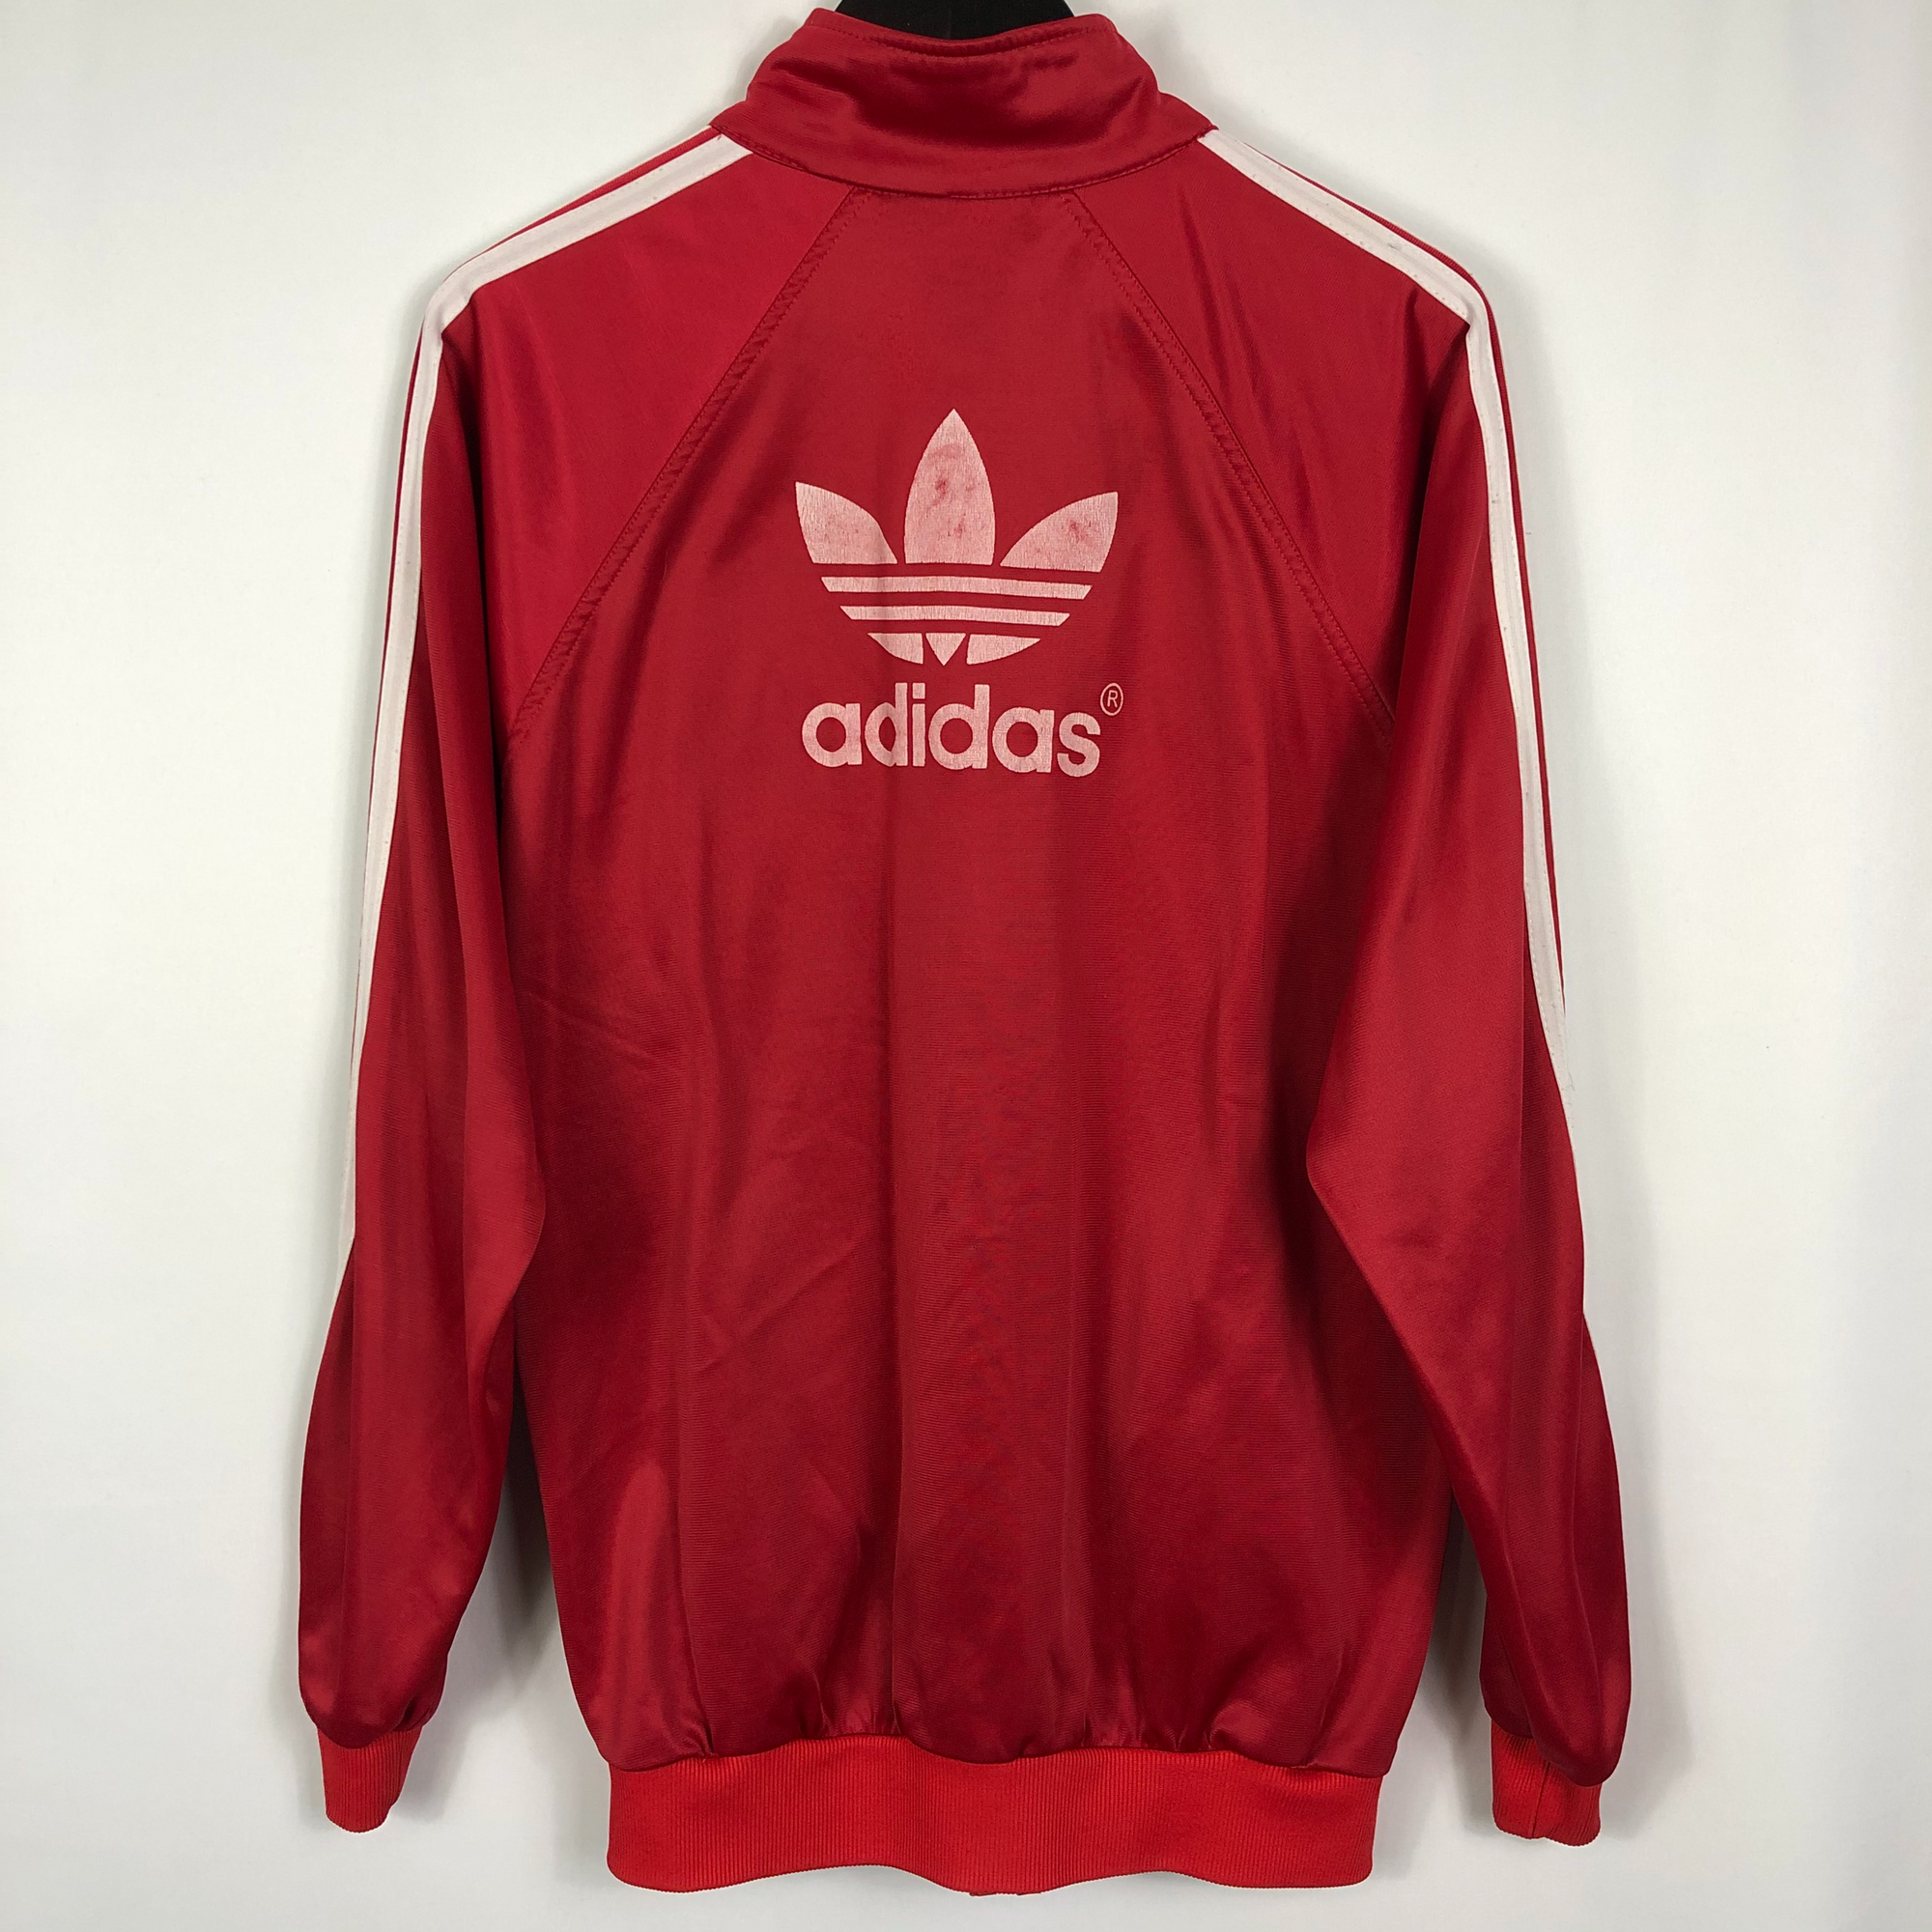 Vintage Adidas Track Jacket in Red - Men's Large/Women's XL